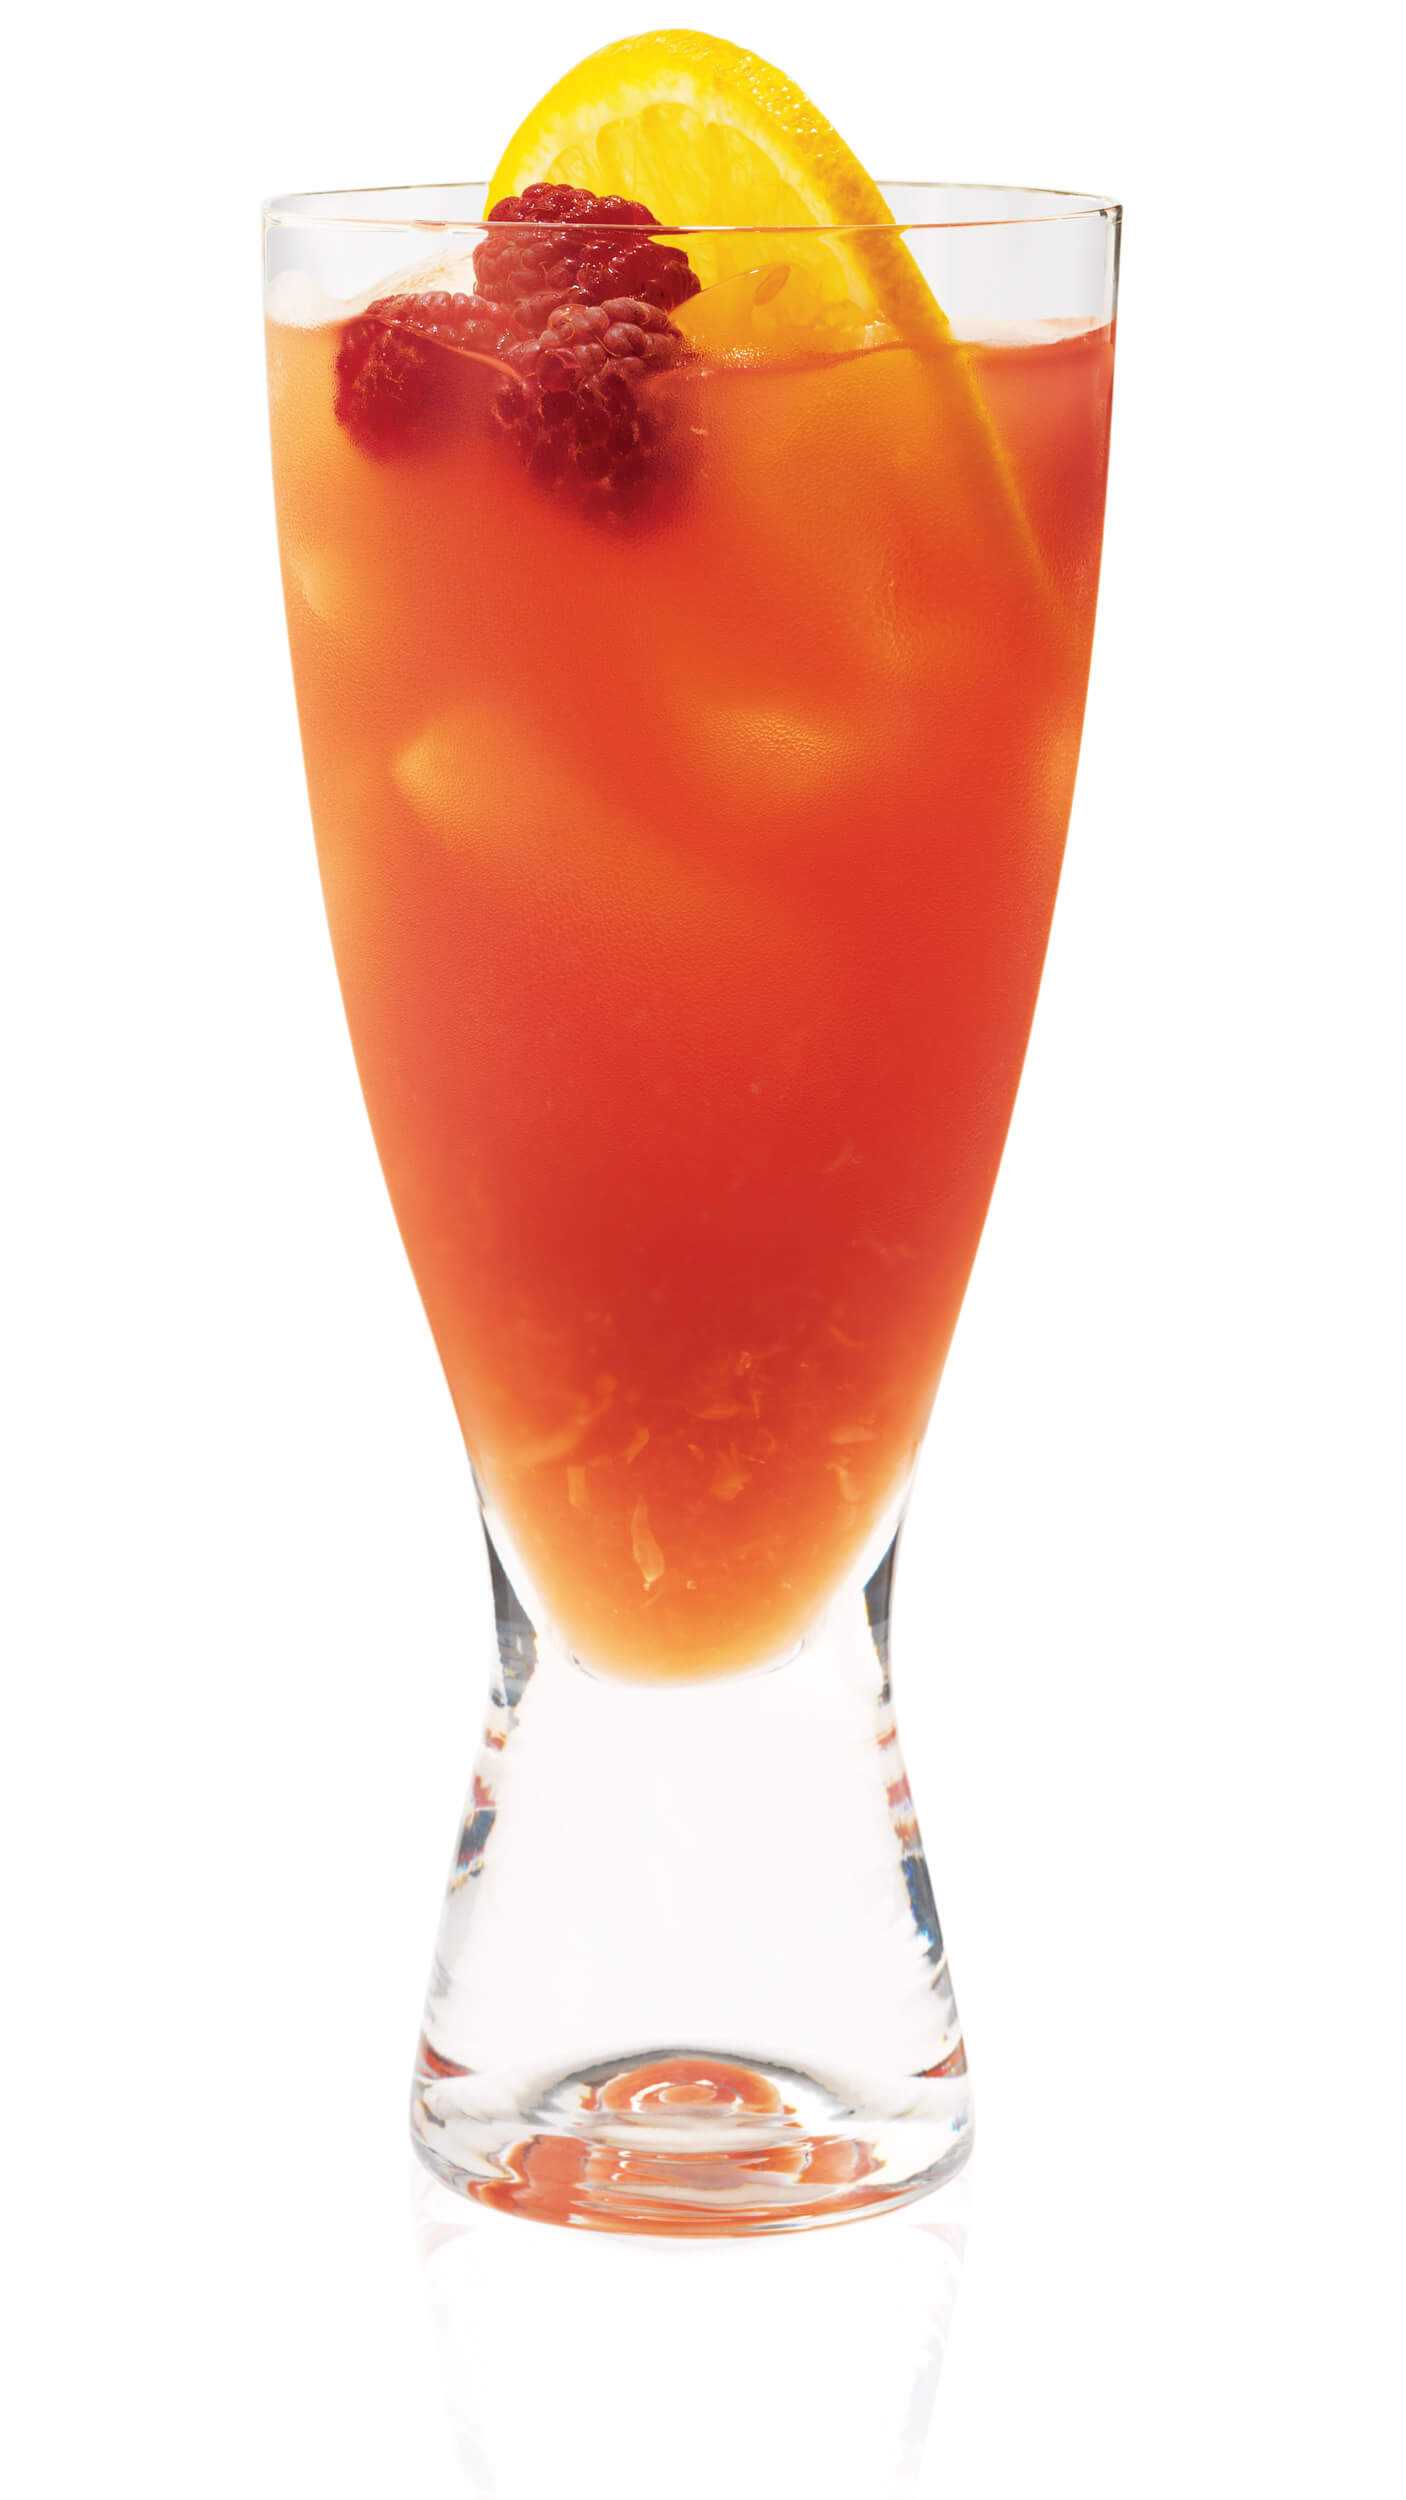 Vodka strawberry lemonade with EFFEN Original: fruity with strawberry infused vodka & ginger beer.